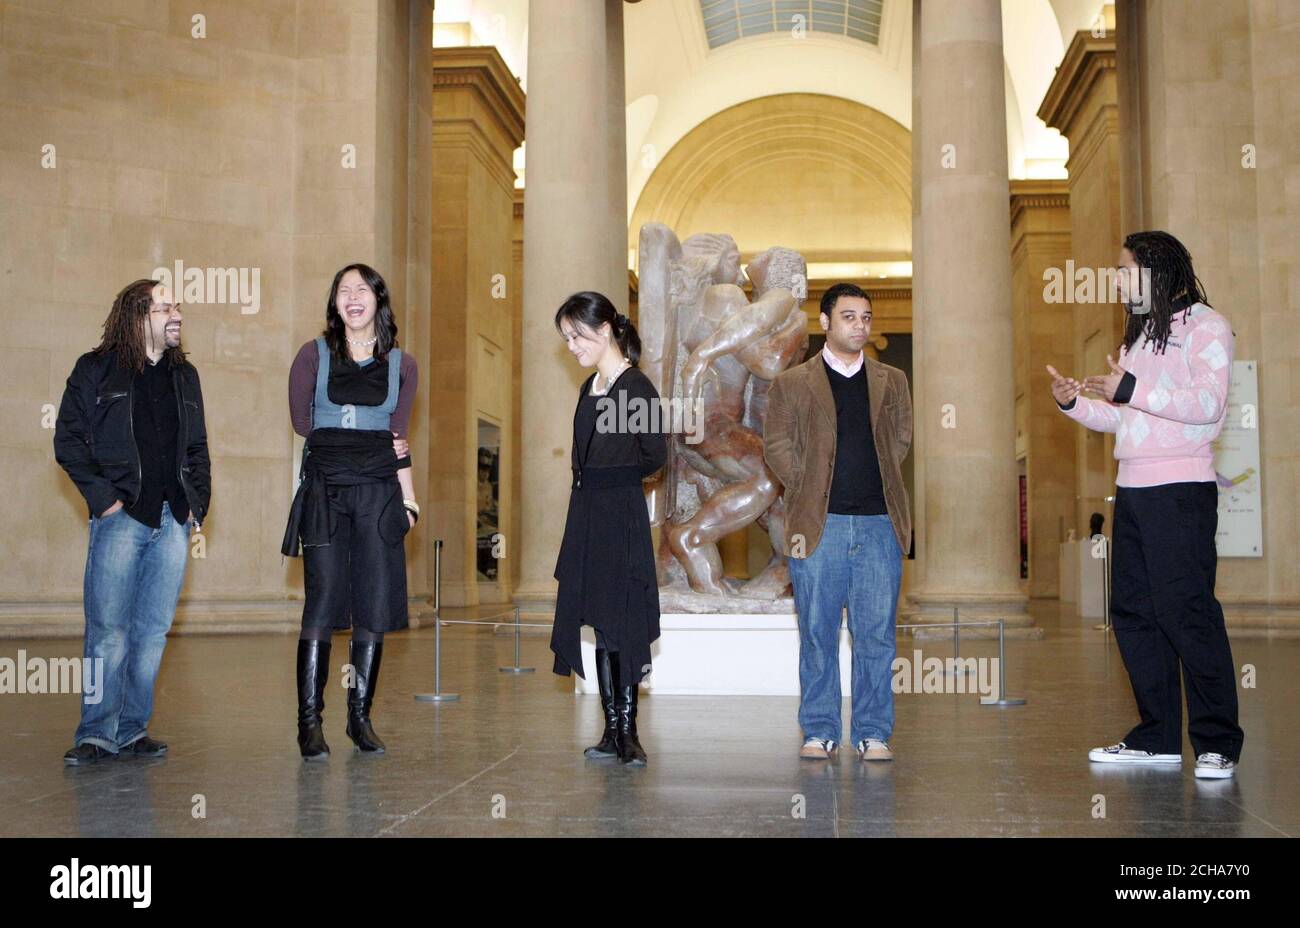 Picture shows the first five 'Fellows' selected by the Arts Council of England for their 'Inspire' scheme, designed to recruit more Black & Asian curators in britain's museums. (L-R) Jonah Albert, Ligaya Salzar, Gina Ha-Gorlin, Cedar Lewisohn and Eddie Otchere, from the Tate Britain, central London, Wednesday 7 December 2005. PRESS ASSOCIATION Photo. Photo credit should read: Mark Lees/PA Stock Photo